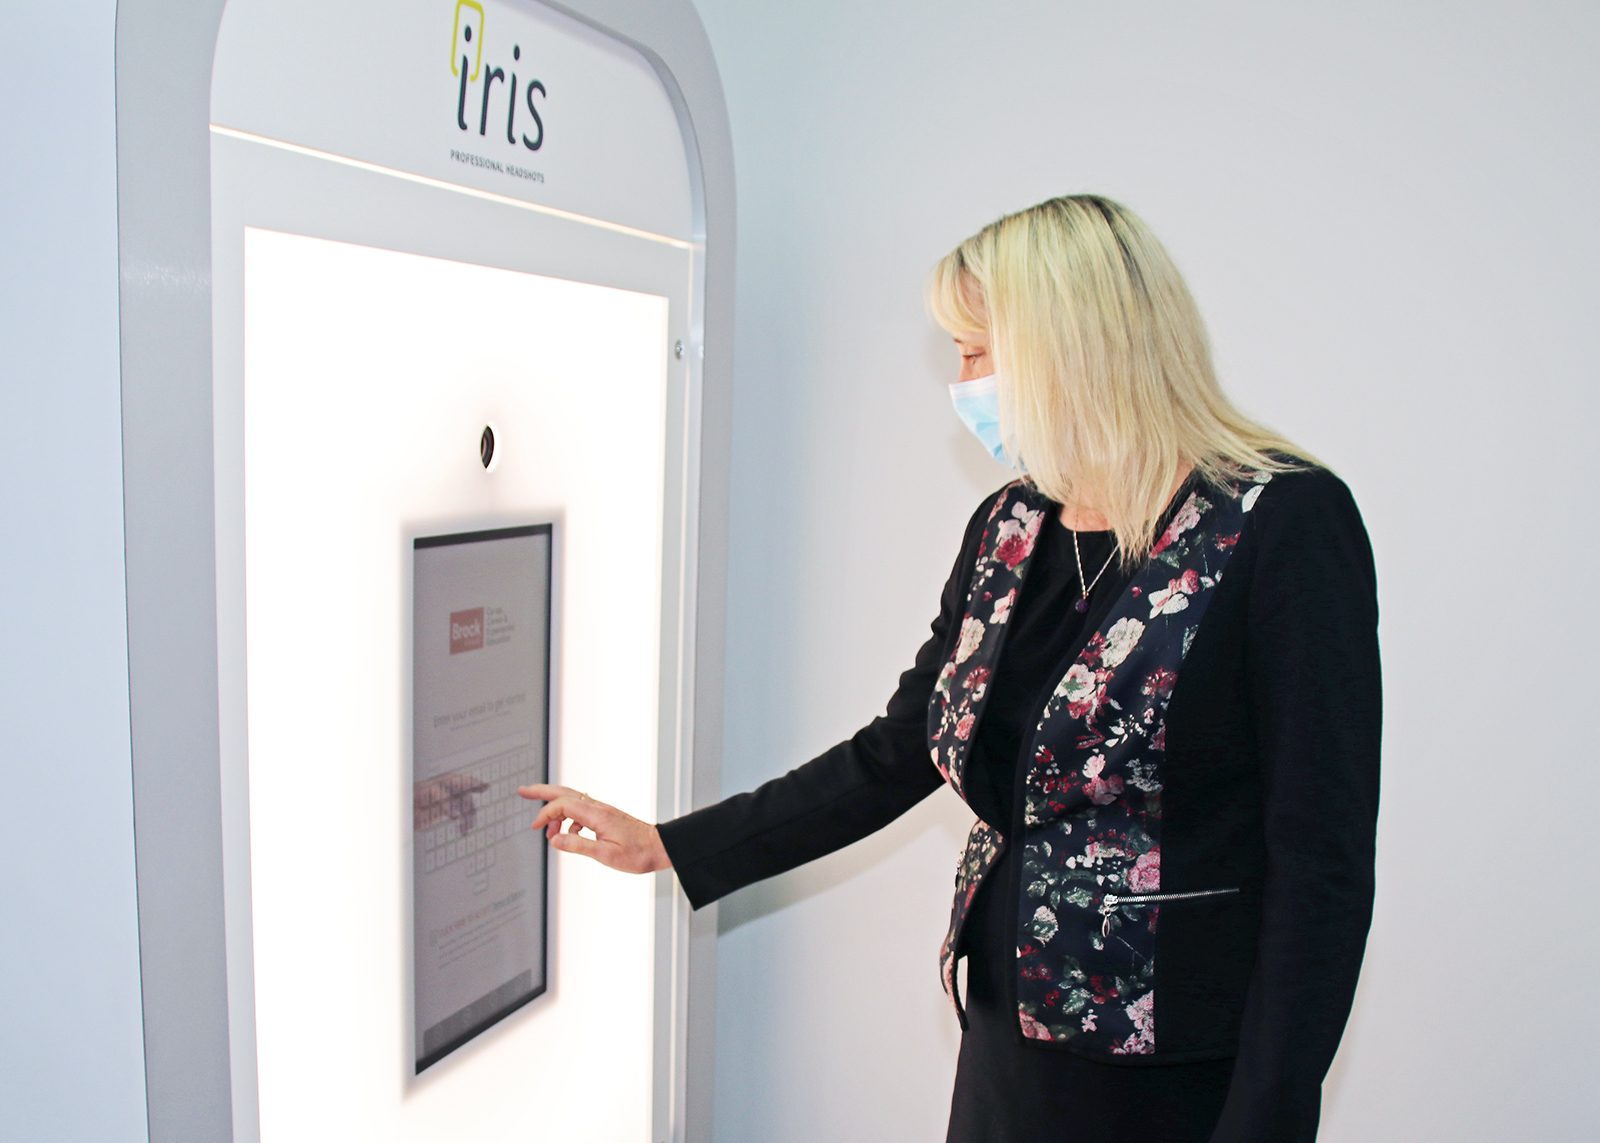 A woman stands in front of a large digital screen that is part of the Iris professional photo booth. She reaches her right hand to the screen to enter contact information.